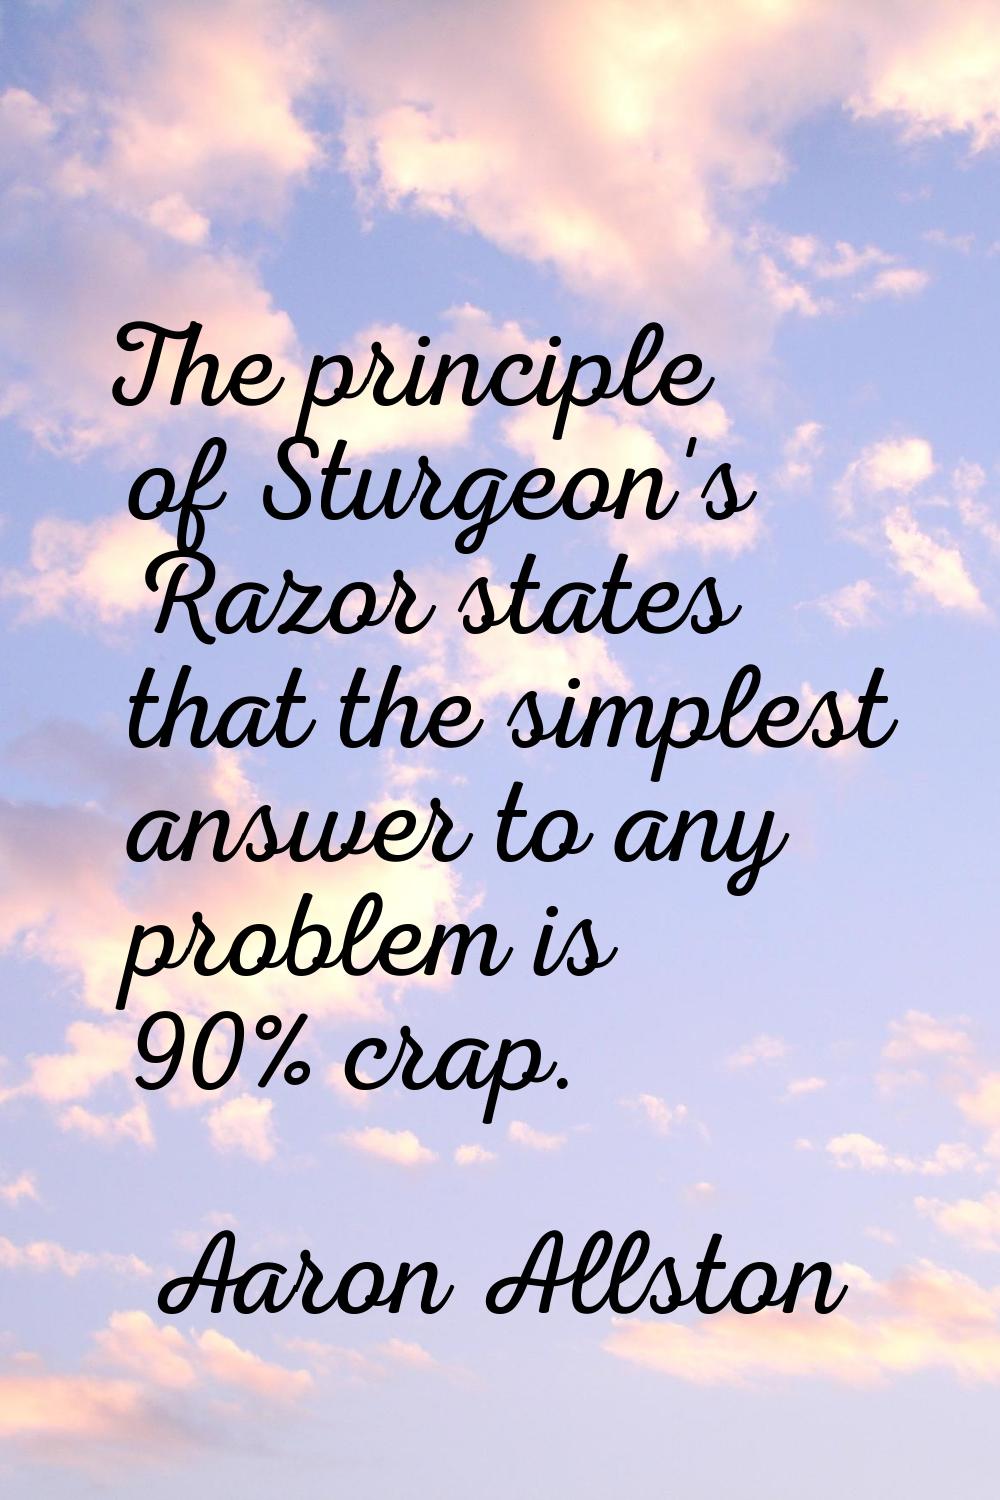 The principle of Sturgeon's Razor states that the simplest answer to any problem is 90% crap.